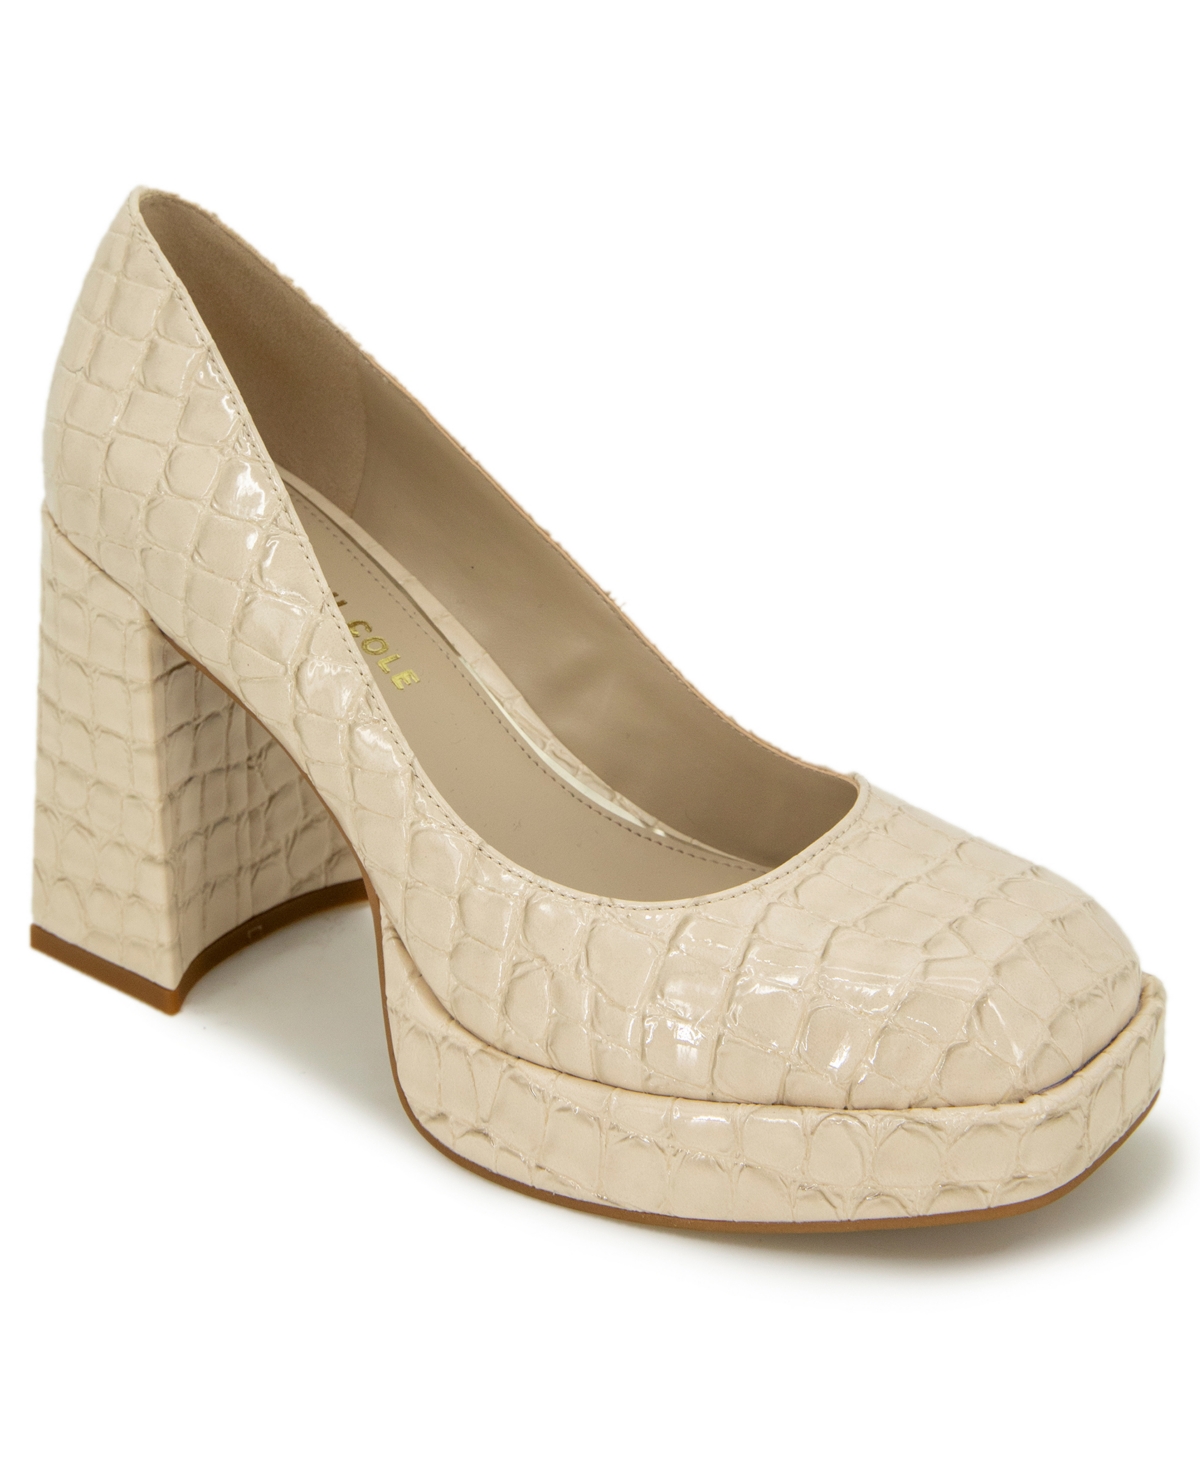 KENNETH COLE NEW YORK Pumps for Women | ModeSens